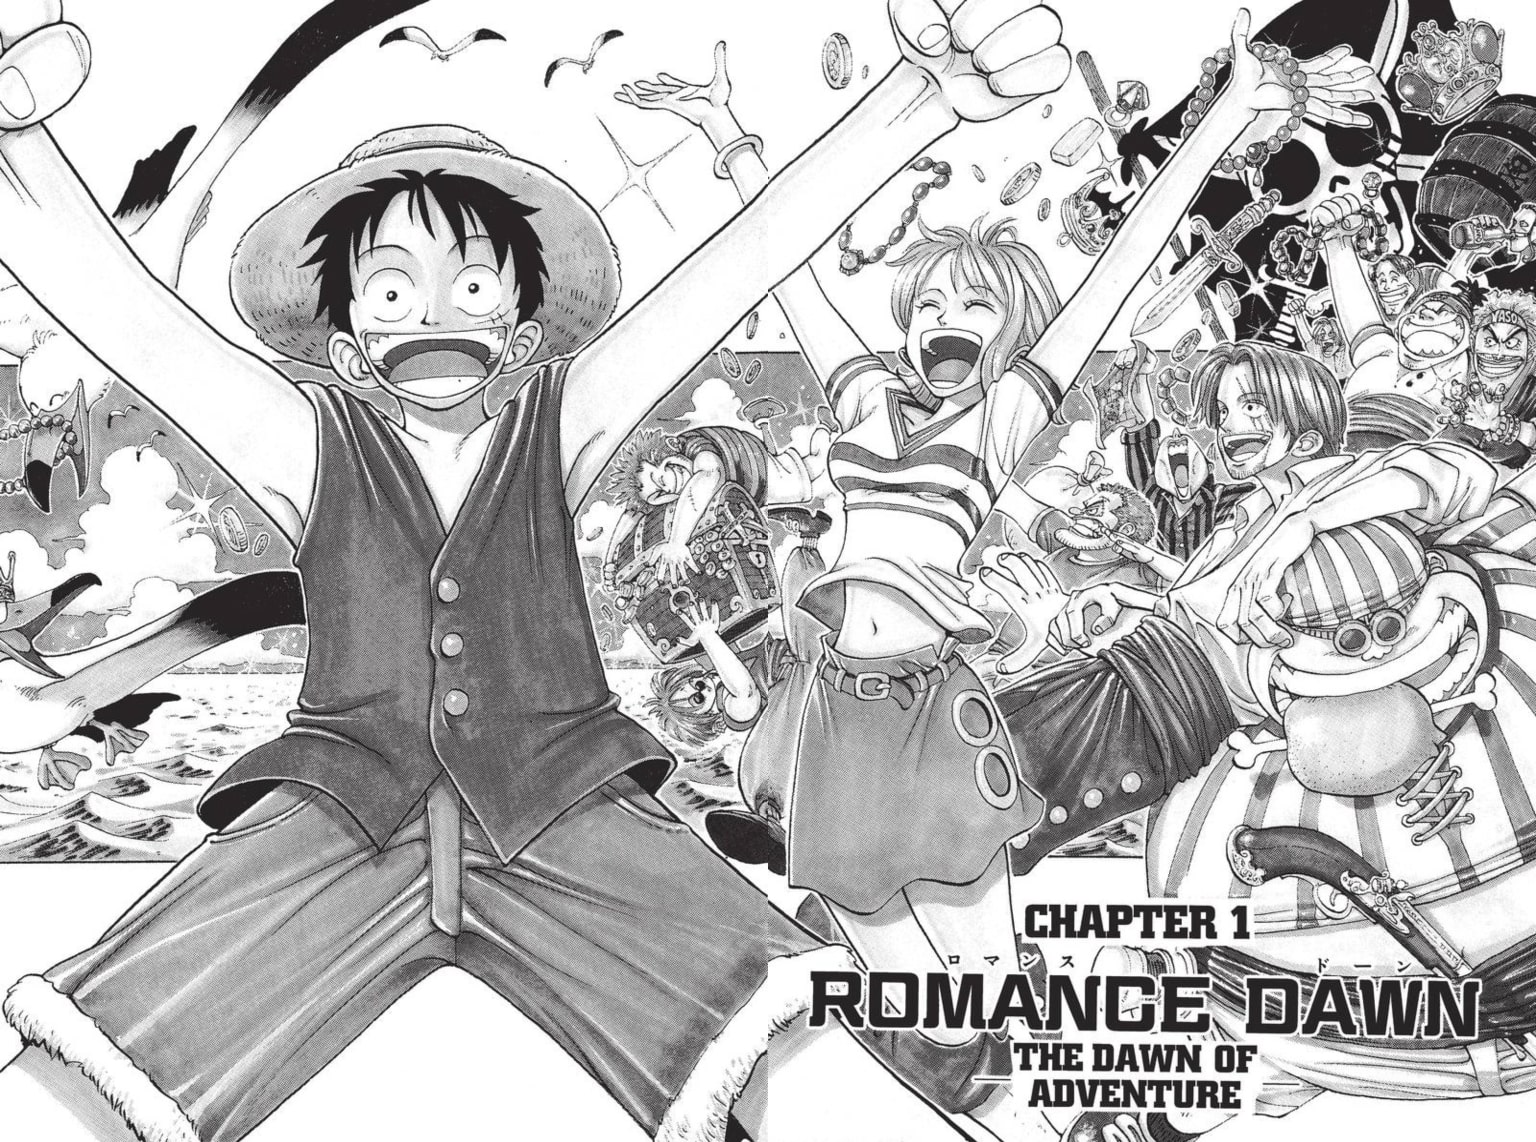 Read 'One Piece' Manga From The Beginning With Chapter 1 and